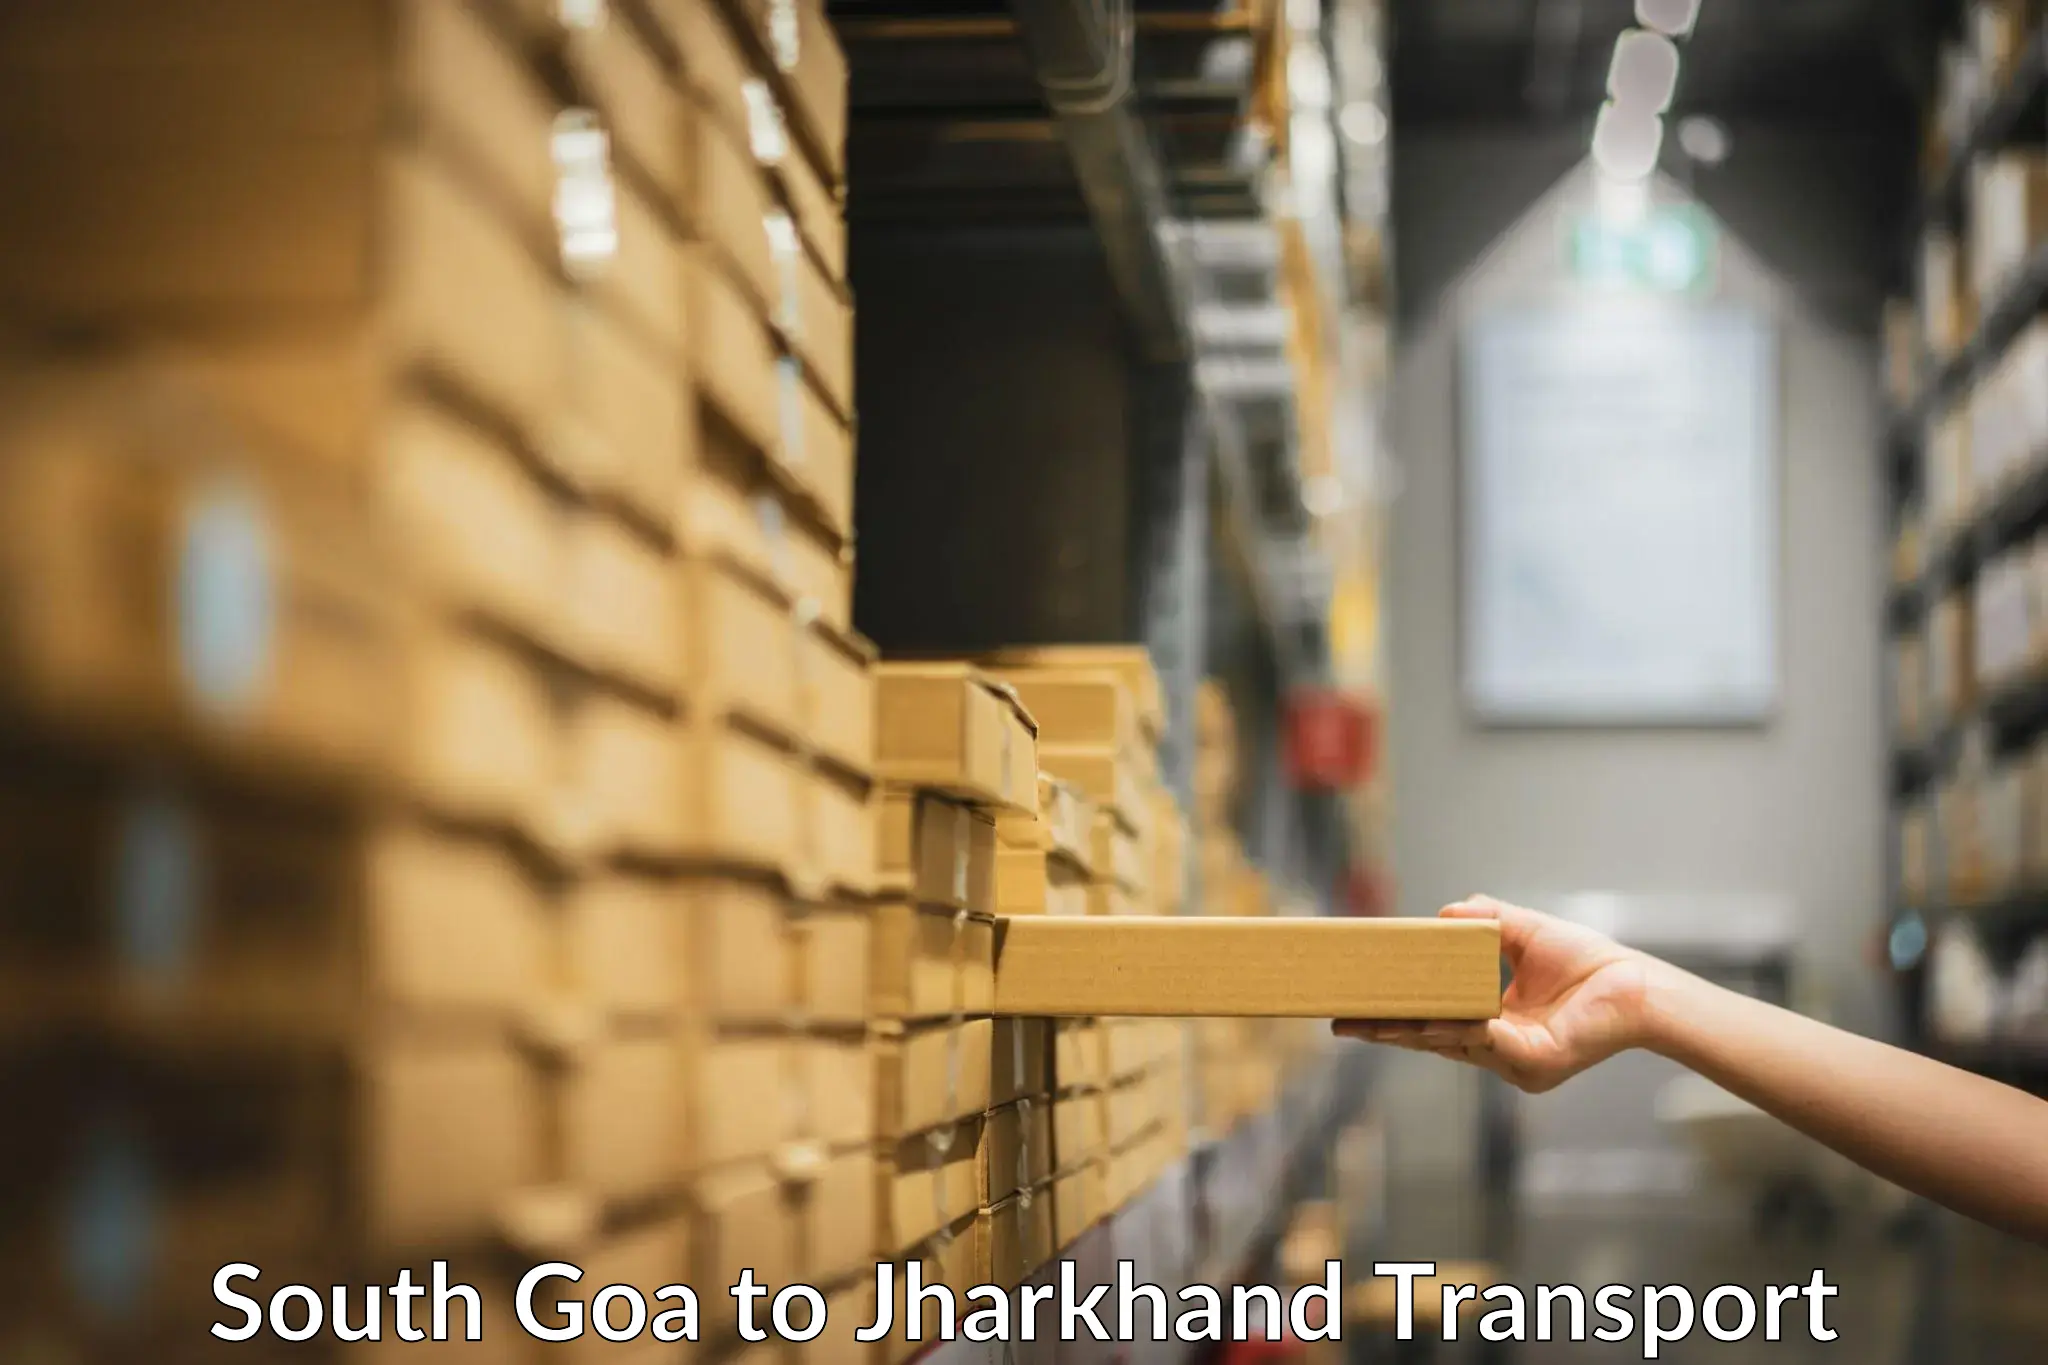 Nationwide transport services South Goa to Bokaro Steel City